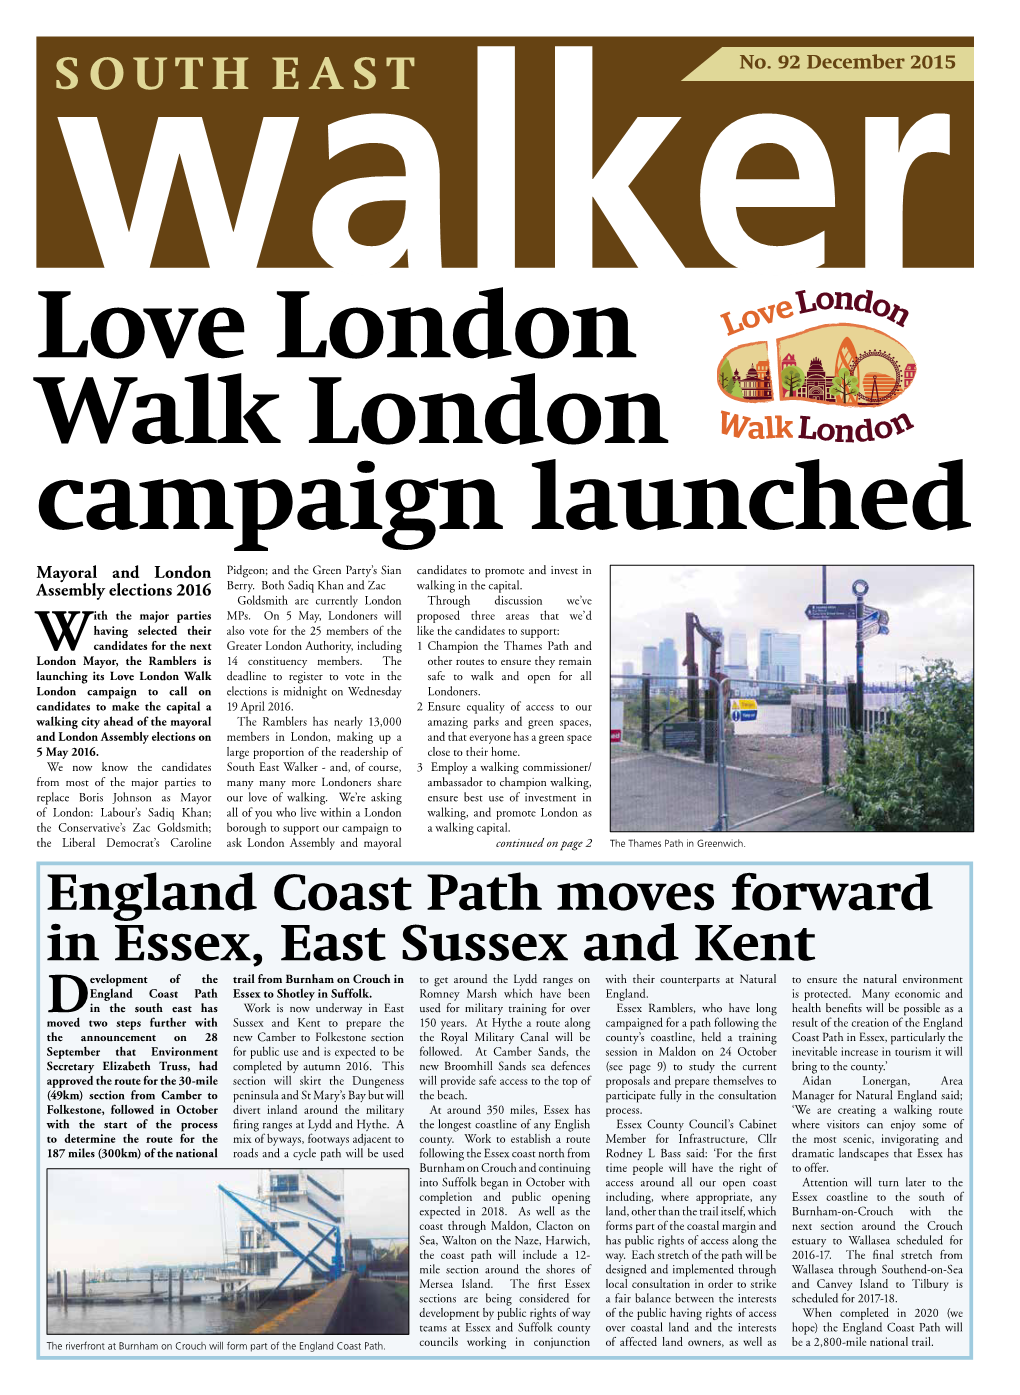 England Coast Path Moves Forward in Essex, East Sussex and Kent